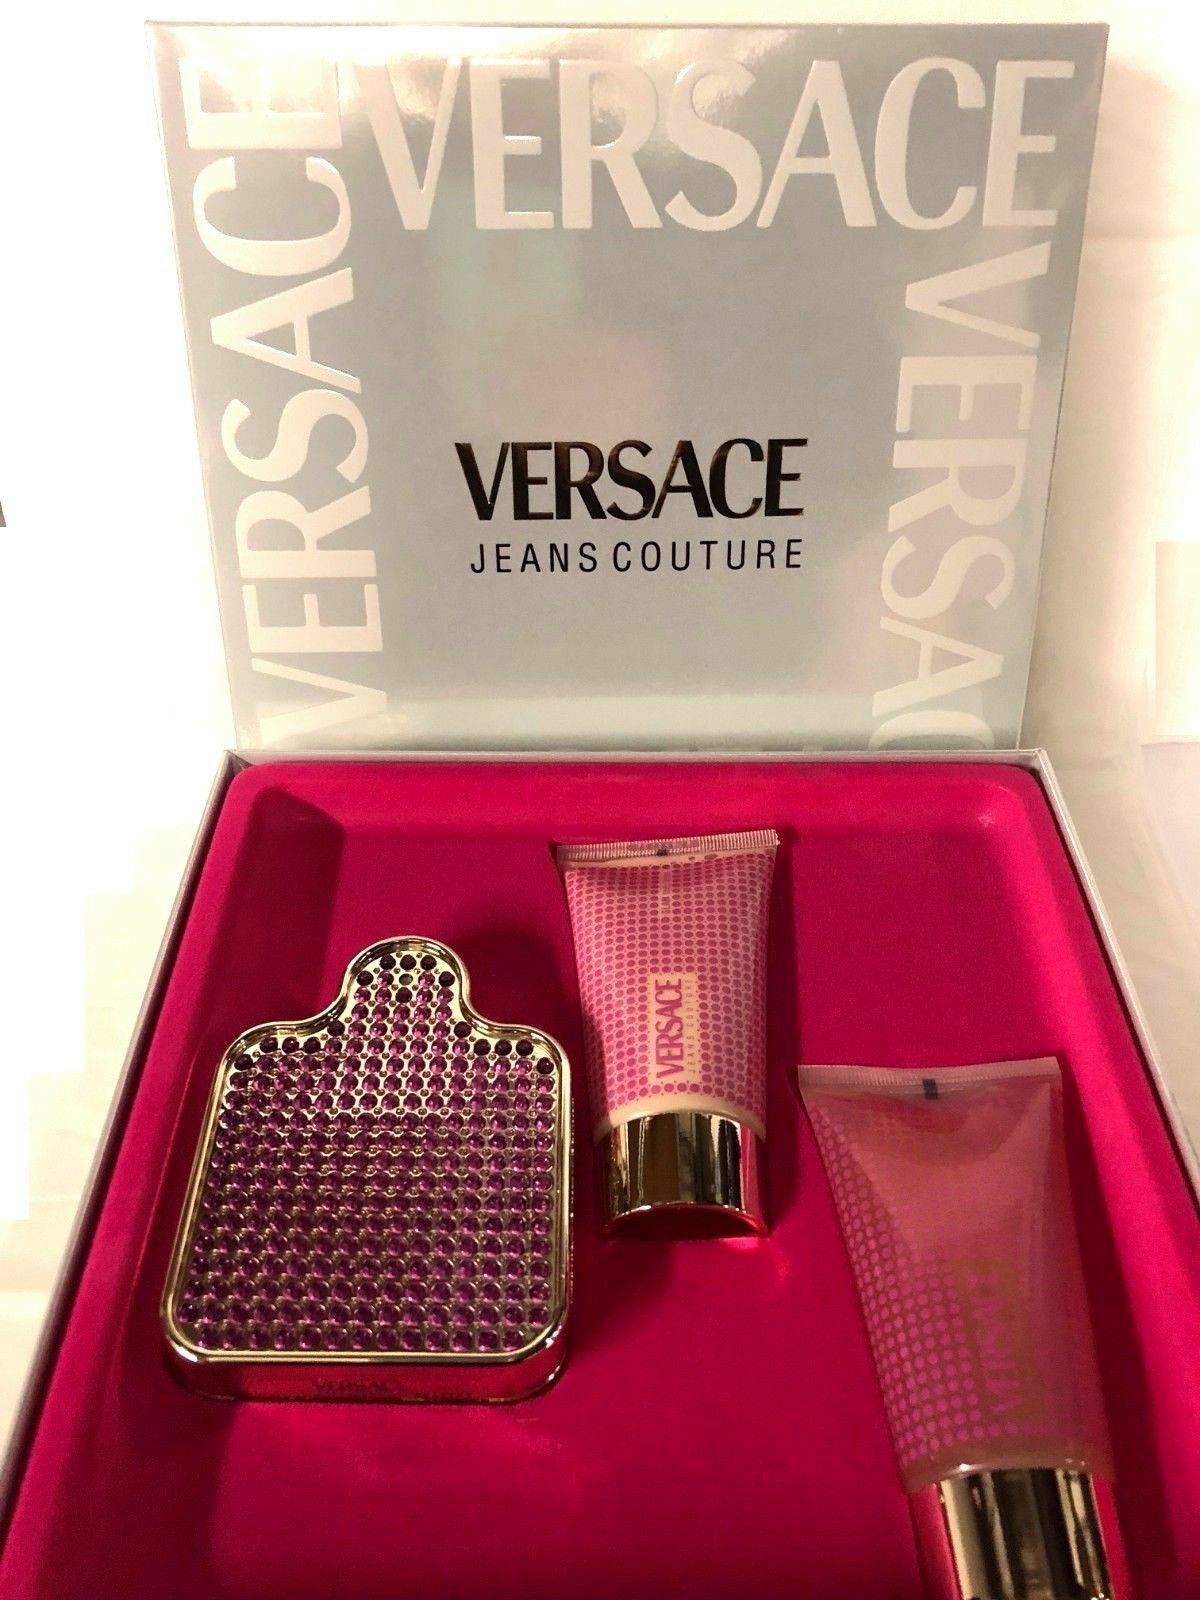 Aaaaaaaversace jeans couture glam set